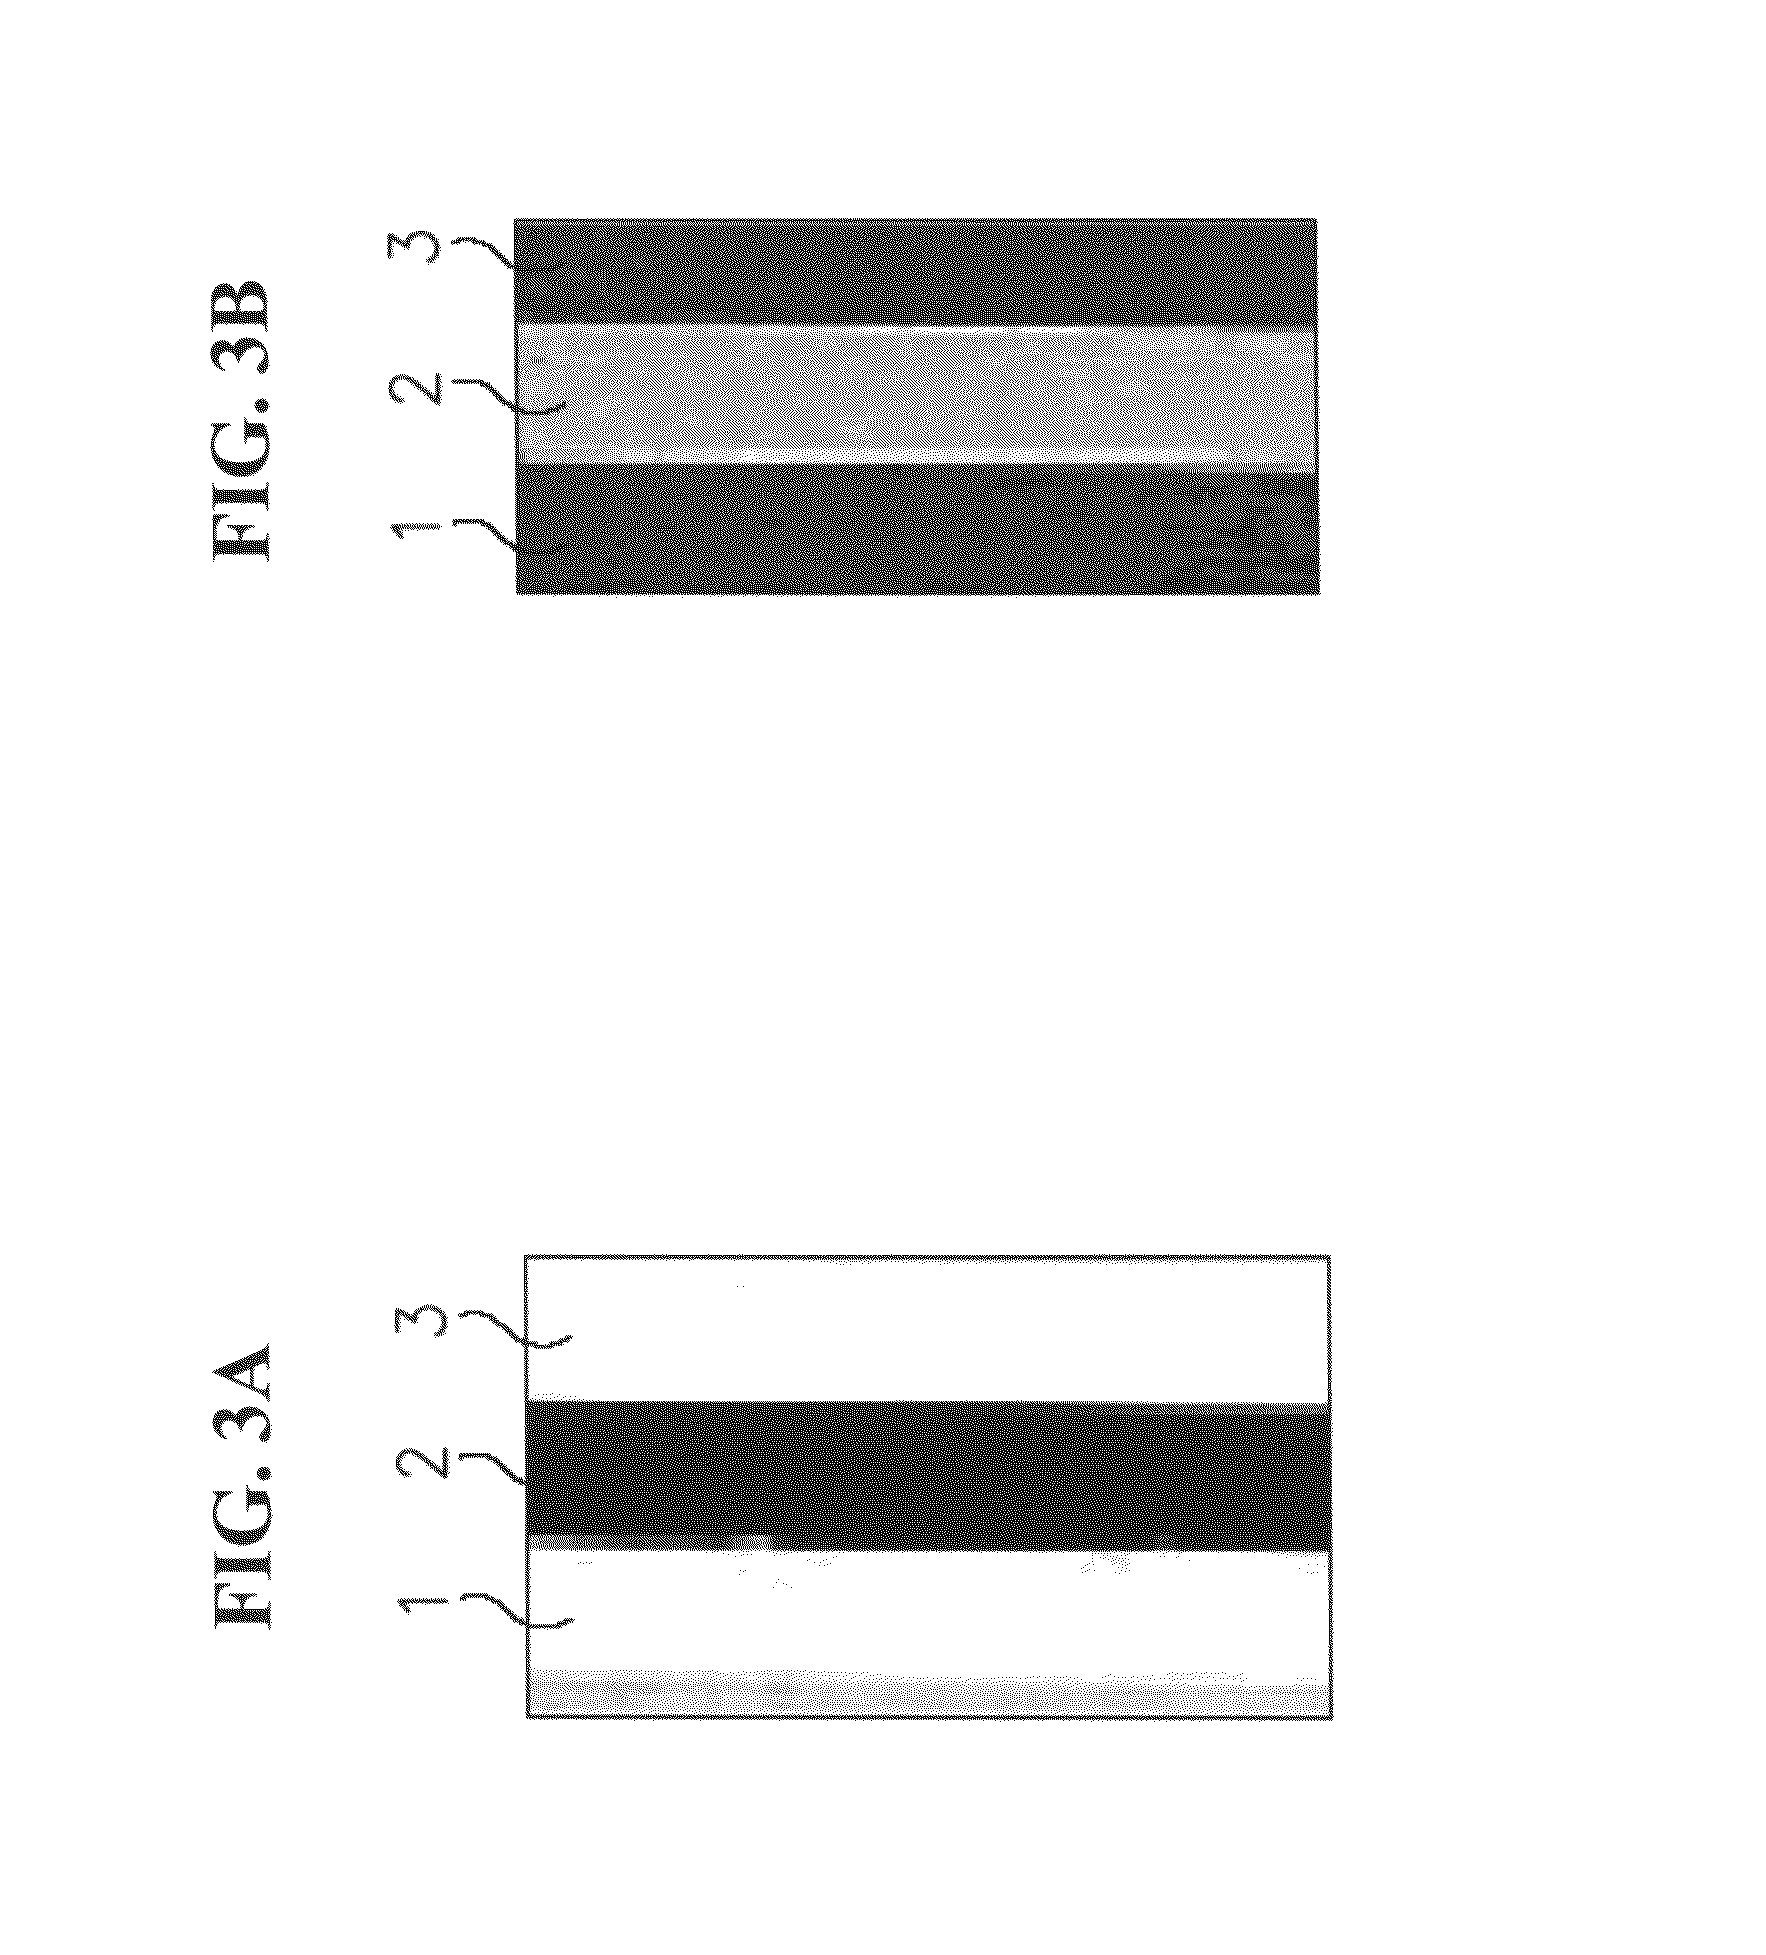 Composition and methods for cell killing